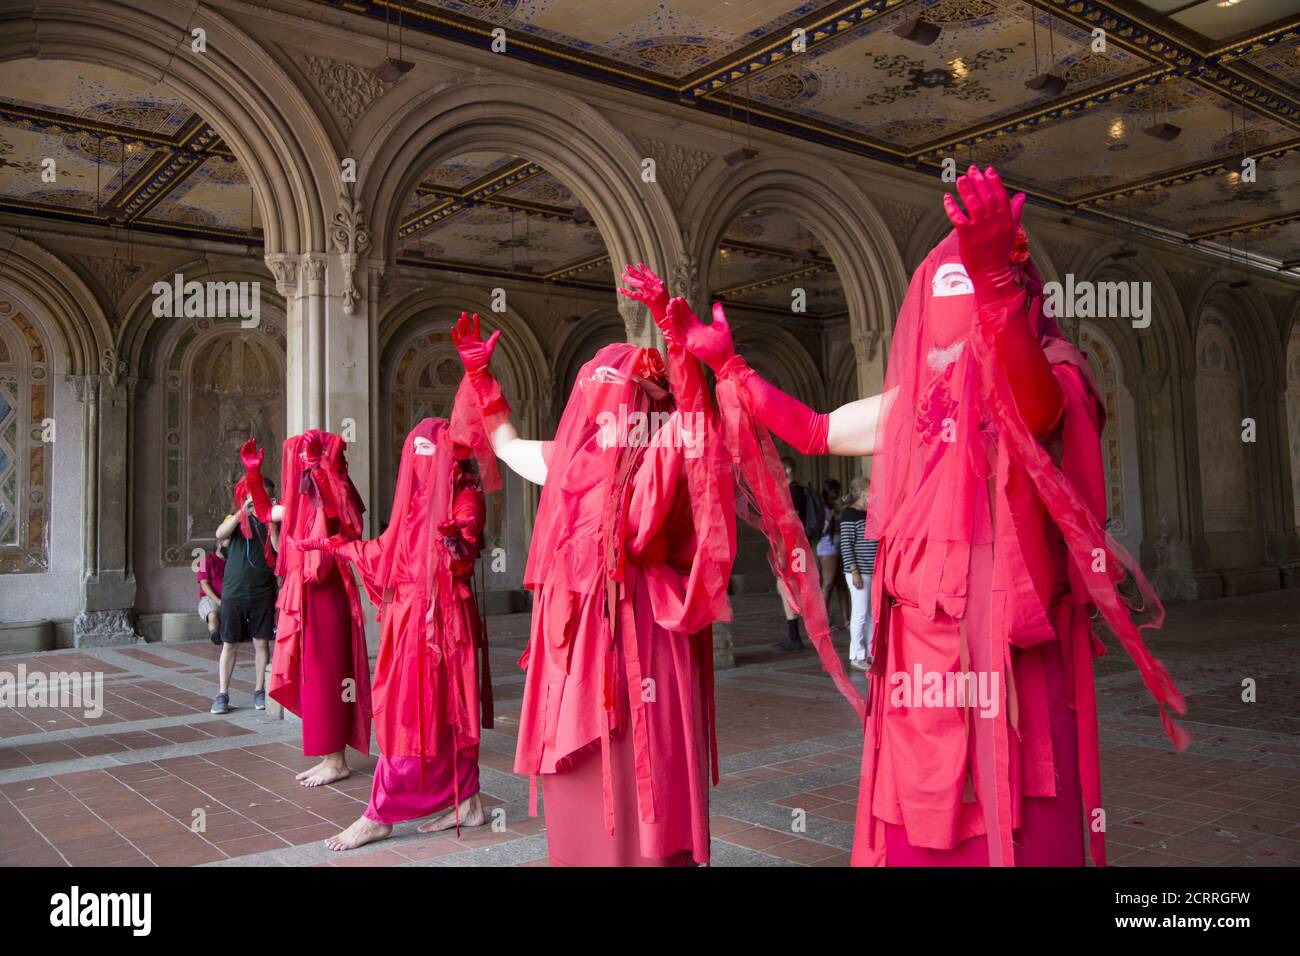 The Red Rebels, Brigade, who are a branch of Extinction Rebellion, dressed in bright red to signify the blood of species that have died as a result of climate change, as well as those that will die in the future demonstrate and march at Bethesda Fountain in Central Park organized by 'Extinction Rebellion' to bring attention to the immediate need for system change in the US and around the world to combat  the climate crisis that is now being experienced world wide in the form of wildfires, hurricanes, droughts and floods along with air and water pollution at an unprecedented scale. Stock Photo